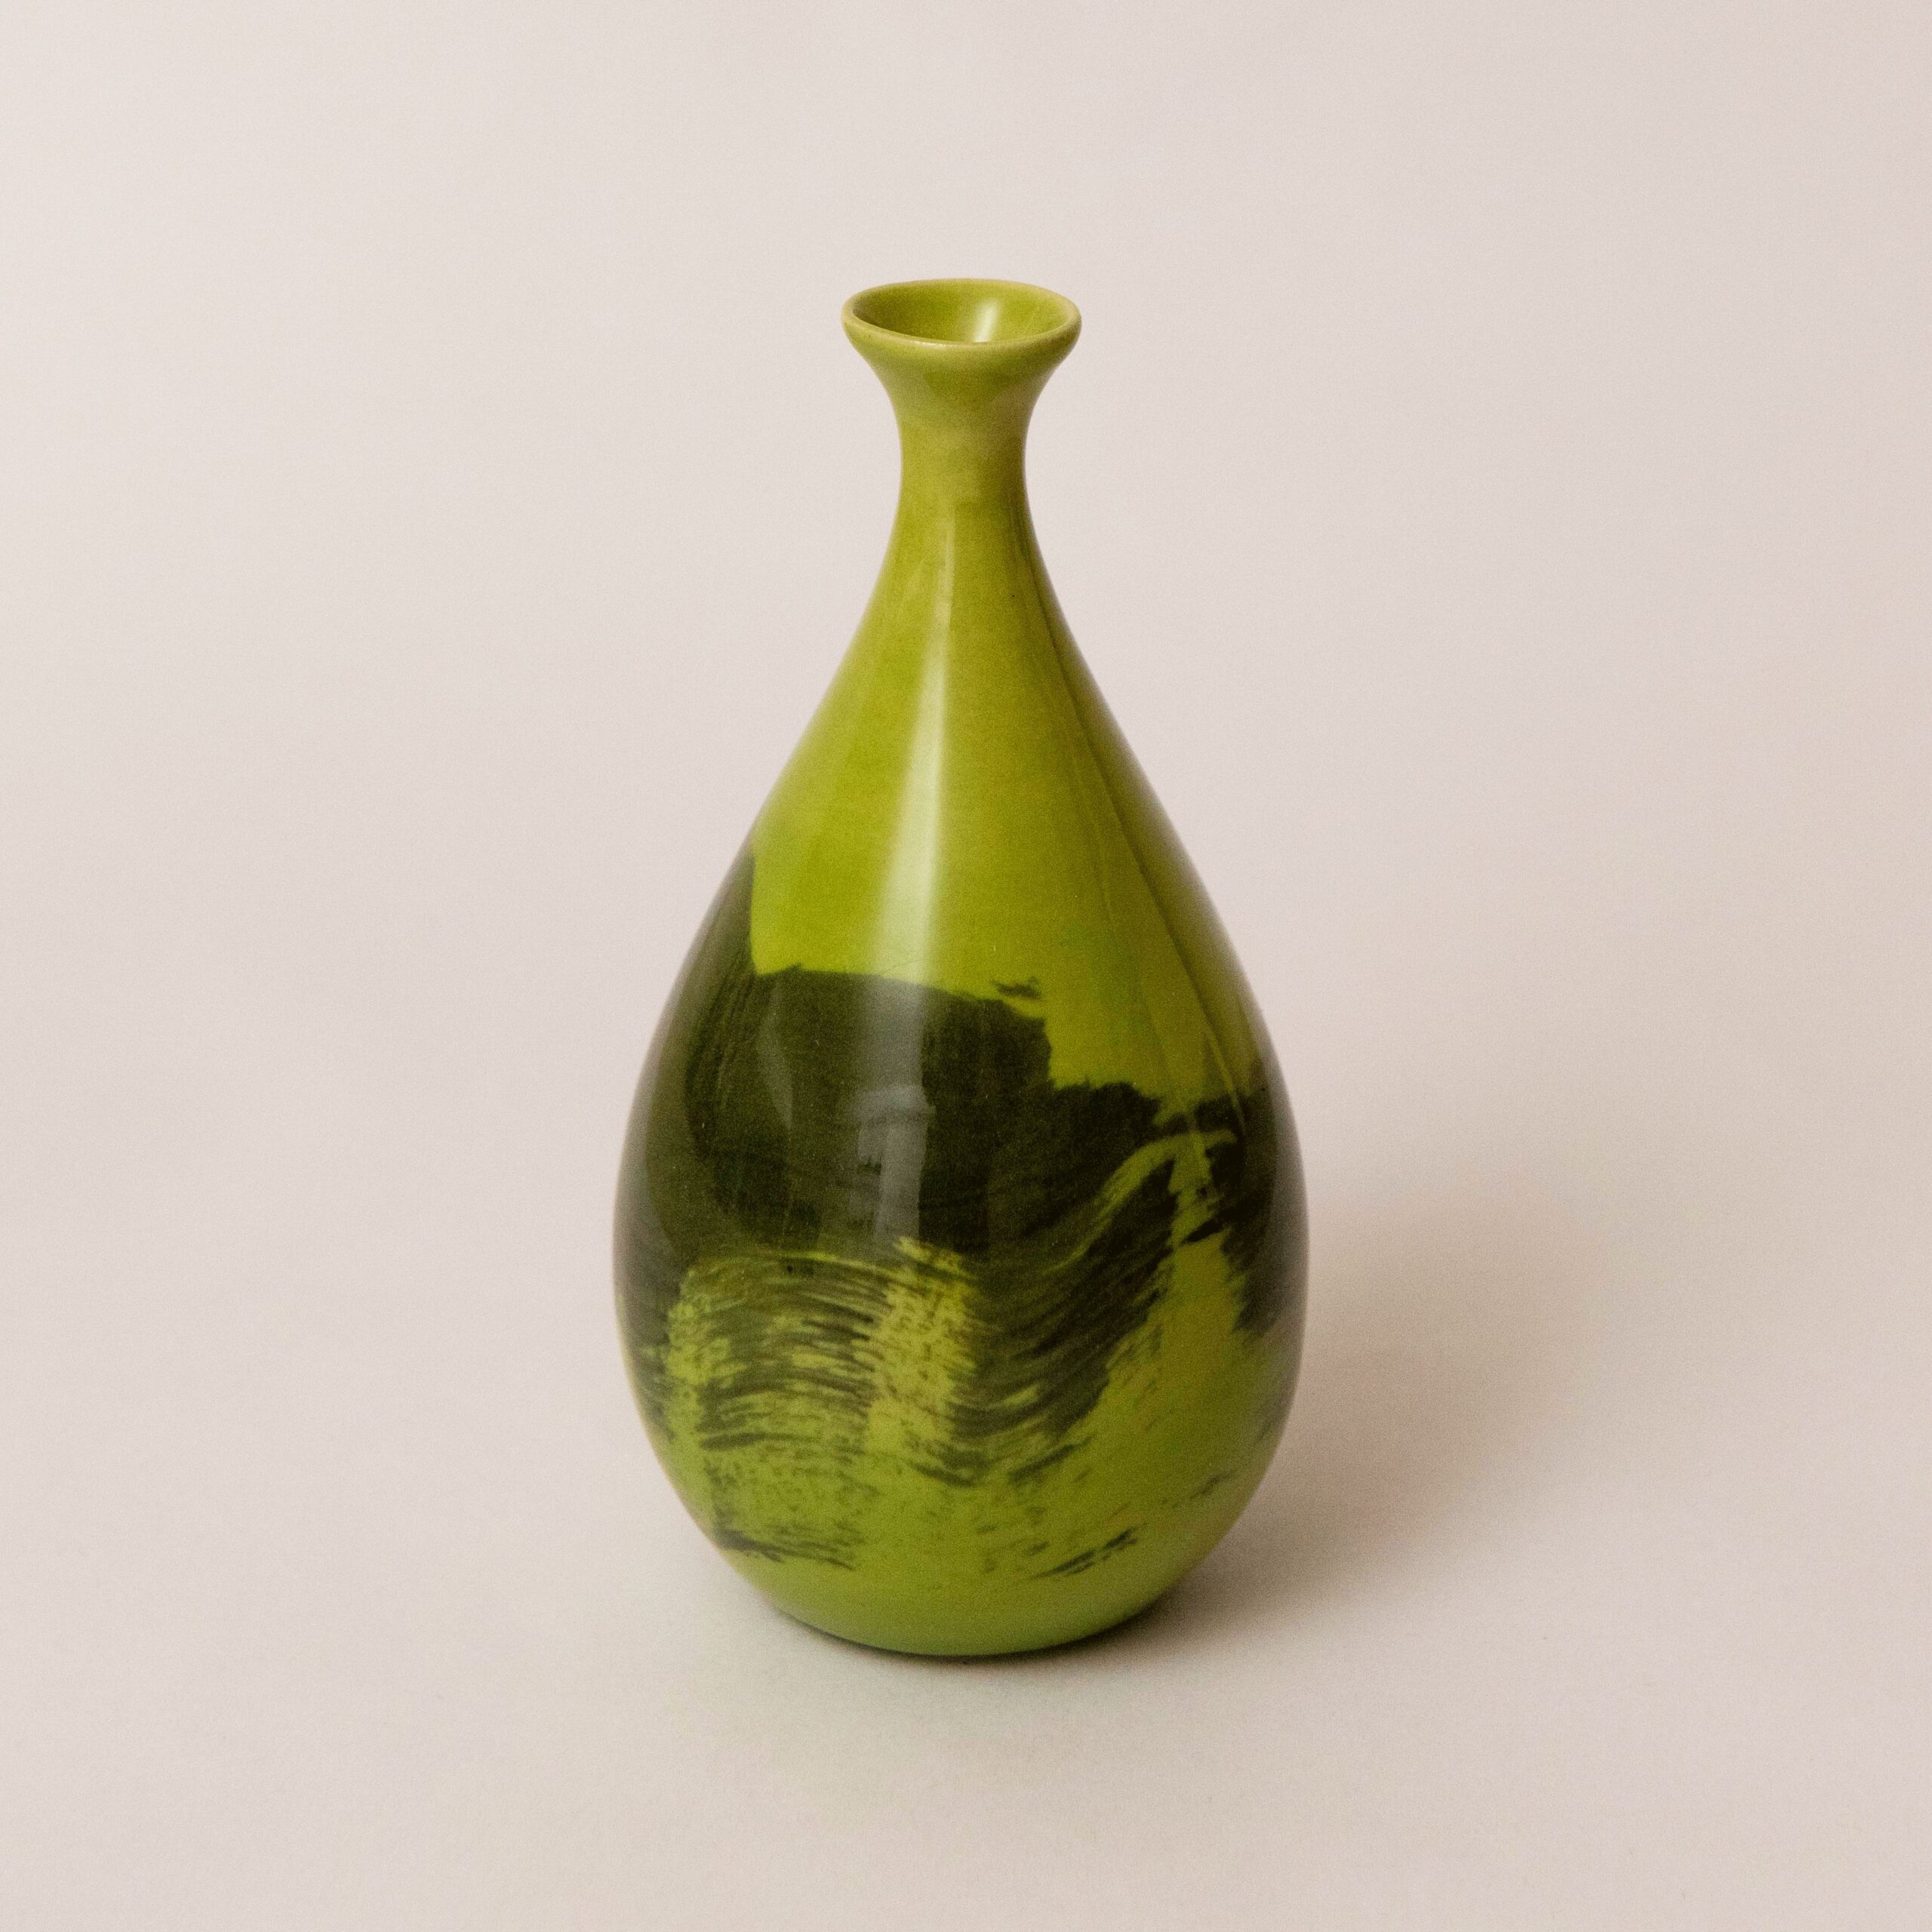 Studio Saboo: Small Brushed Vase in Green Product Image 1 of 1